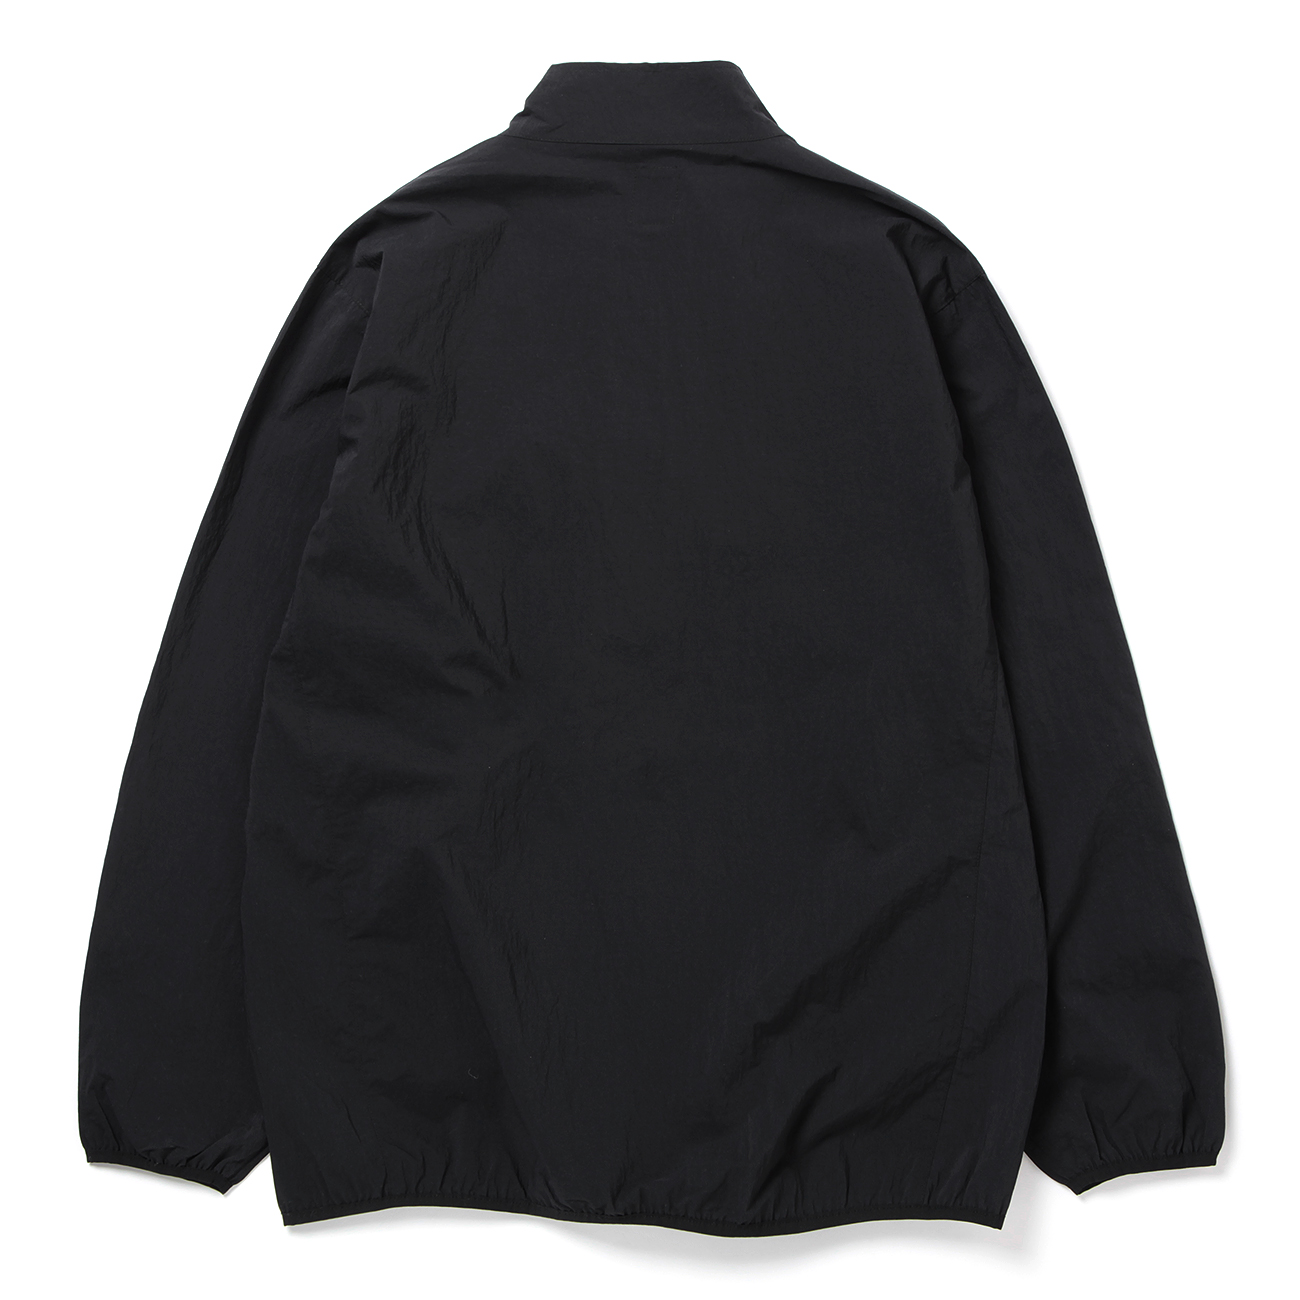 South2 West8 / サウスツーウエストエイト | Packable Jacket - Nylon ...